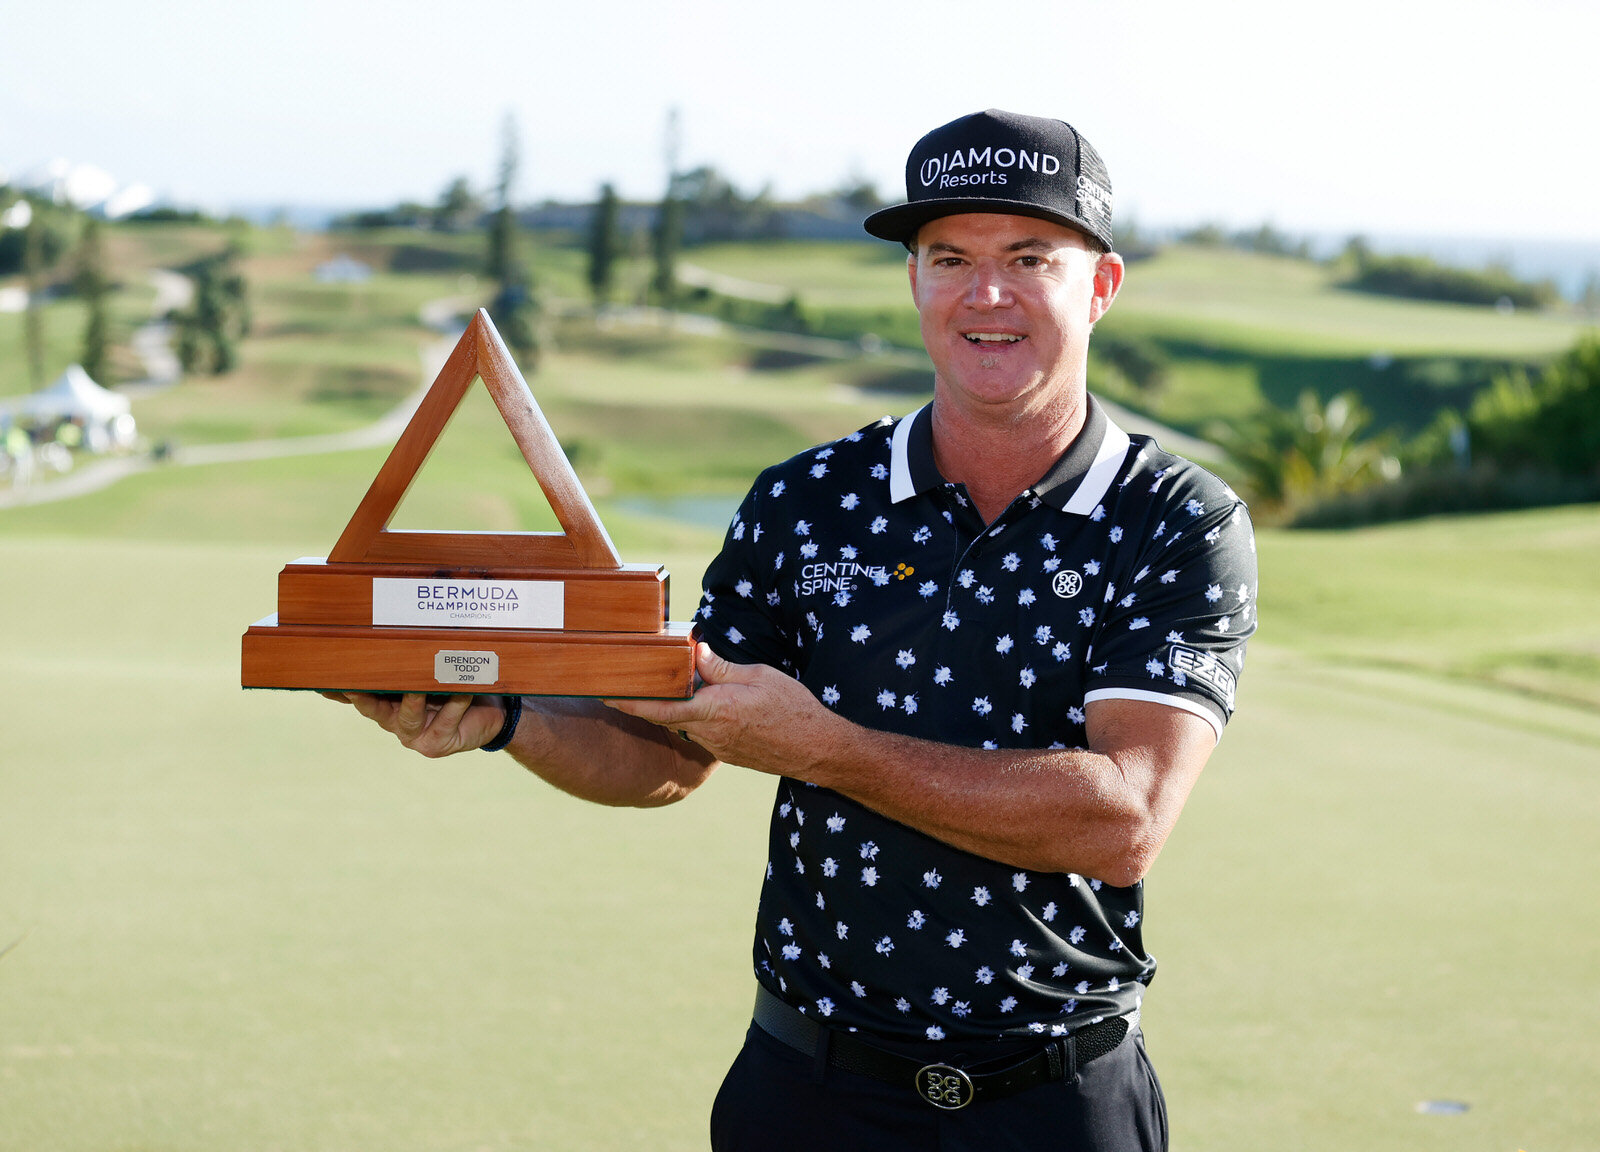  SOUTHAMPTON, BERMUDA - NOVEMBER 01: Brian Gay of the United States celebrates with the trophy after winning during a playoff during the final round of the Bermuda Championship at Port Royal Golf Course on November 01, 2020 in Southampton, Bermuda. (